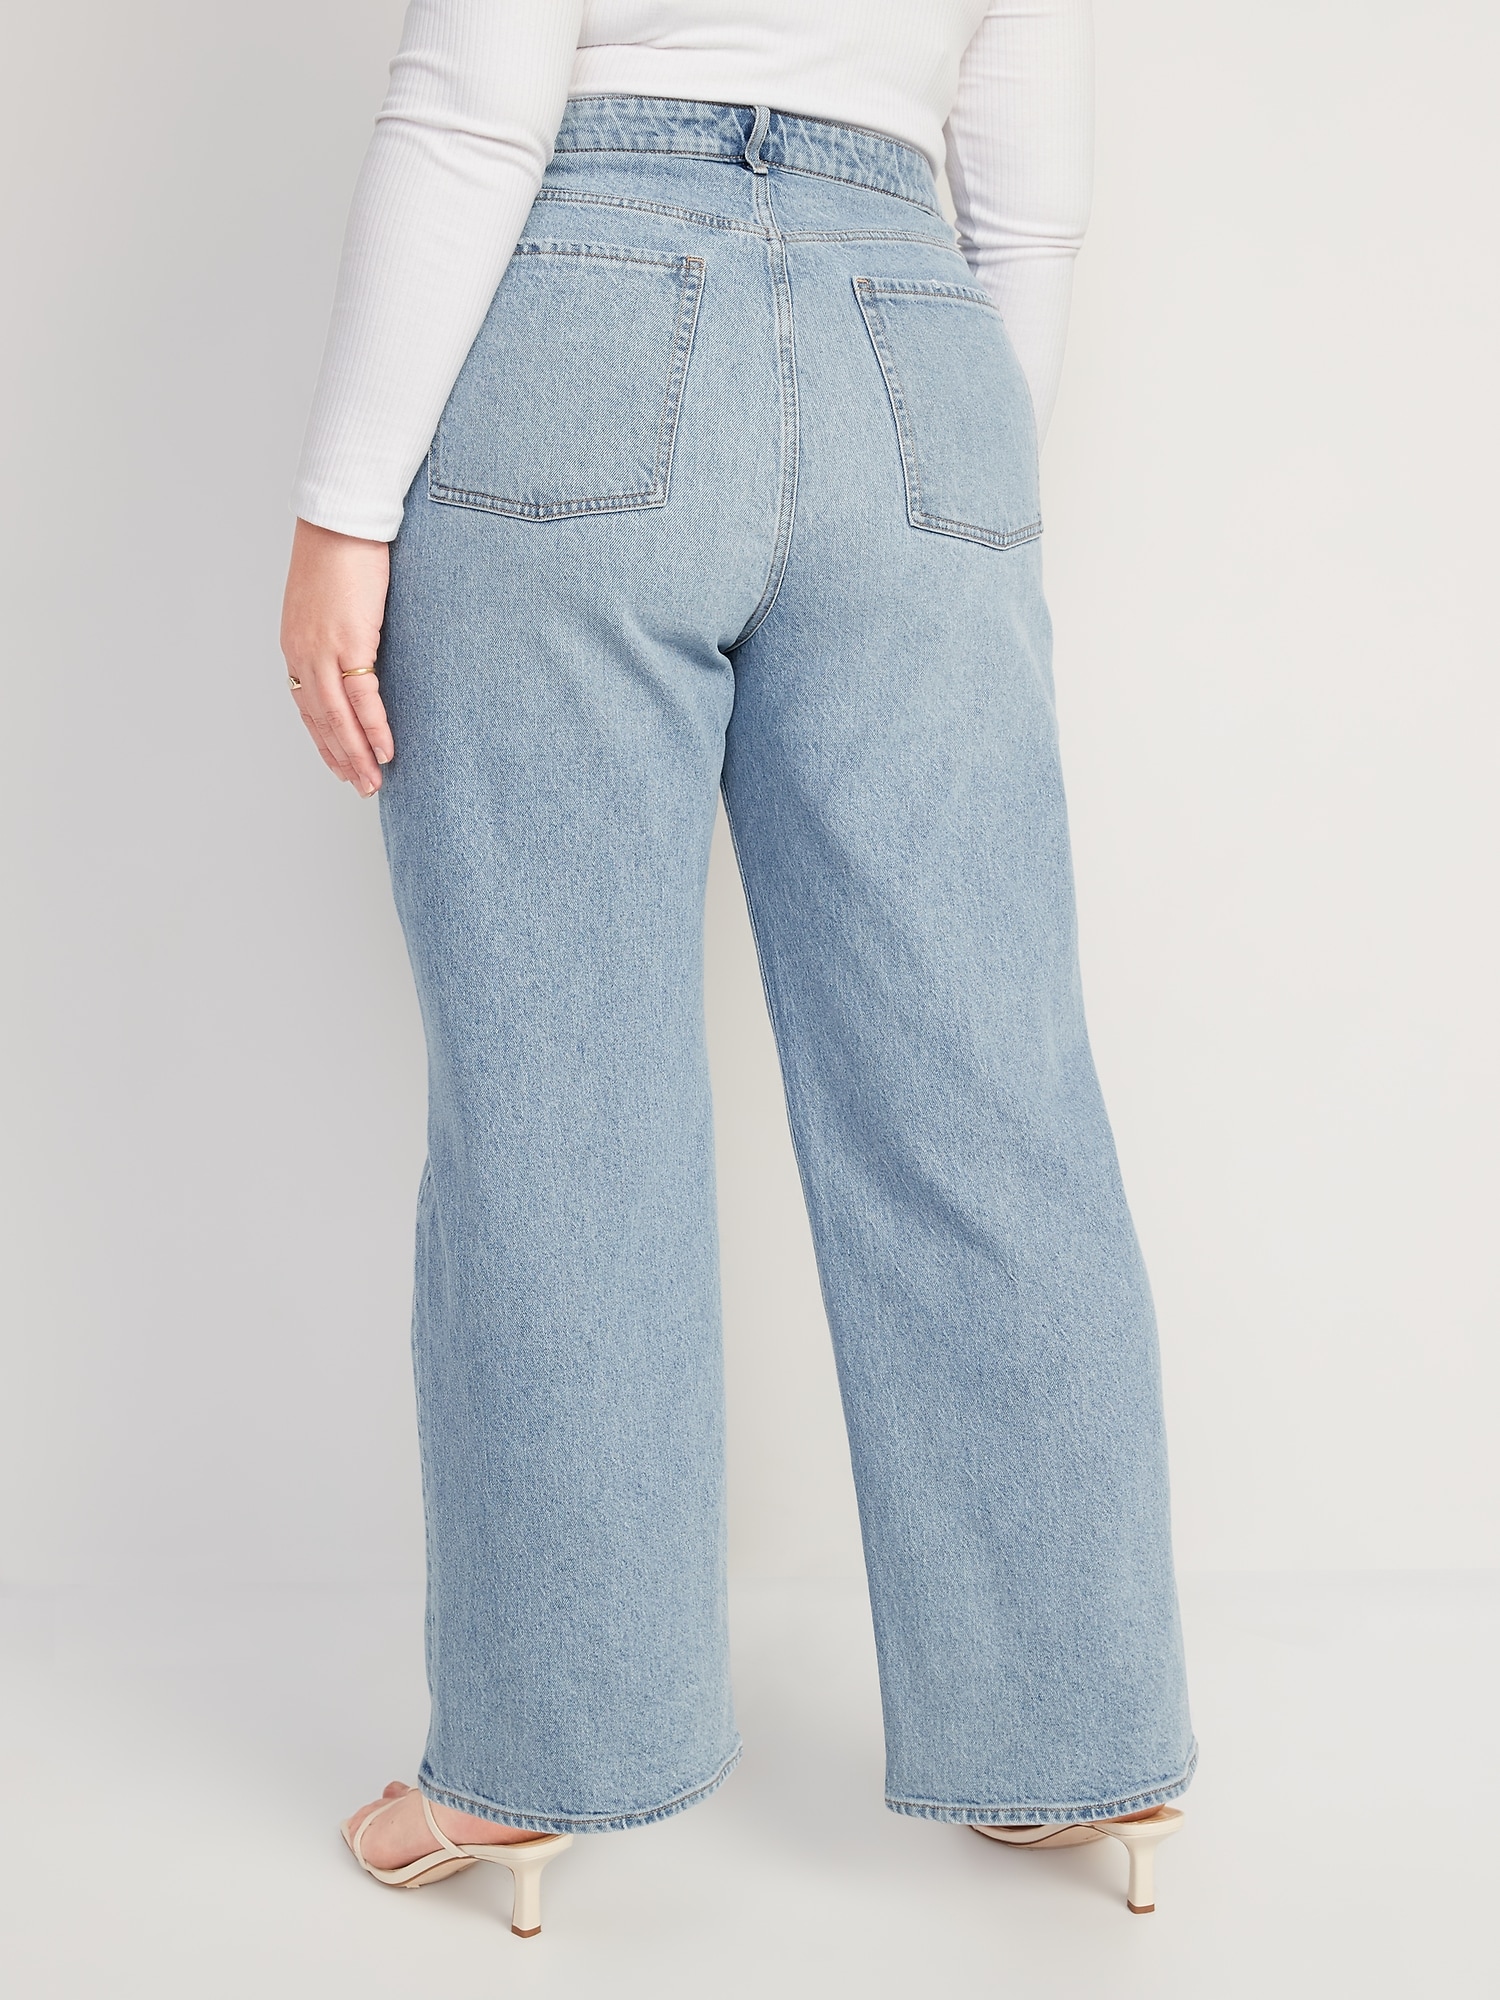 Old Navy Women's High-Waisted Wide-Leg Jeans